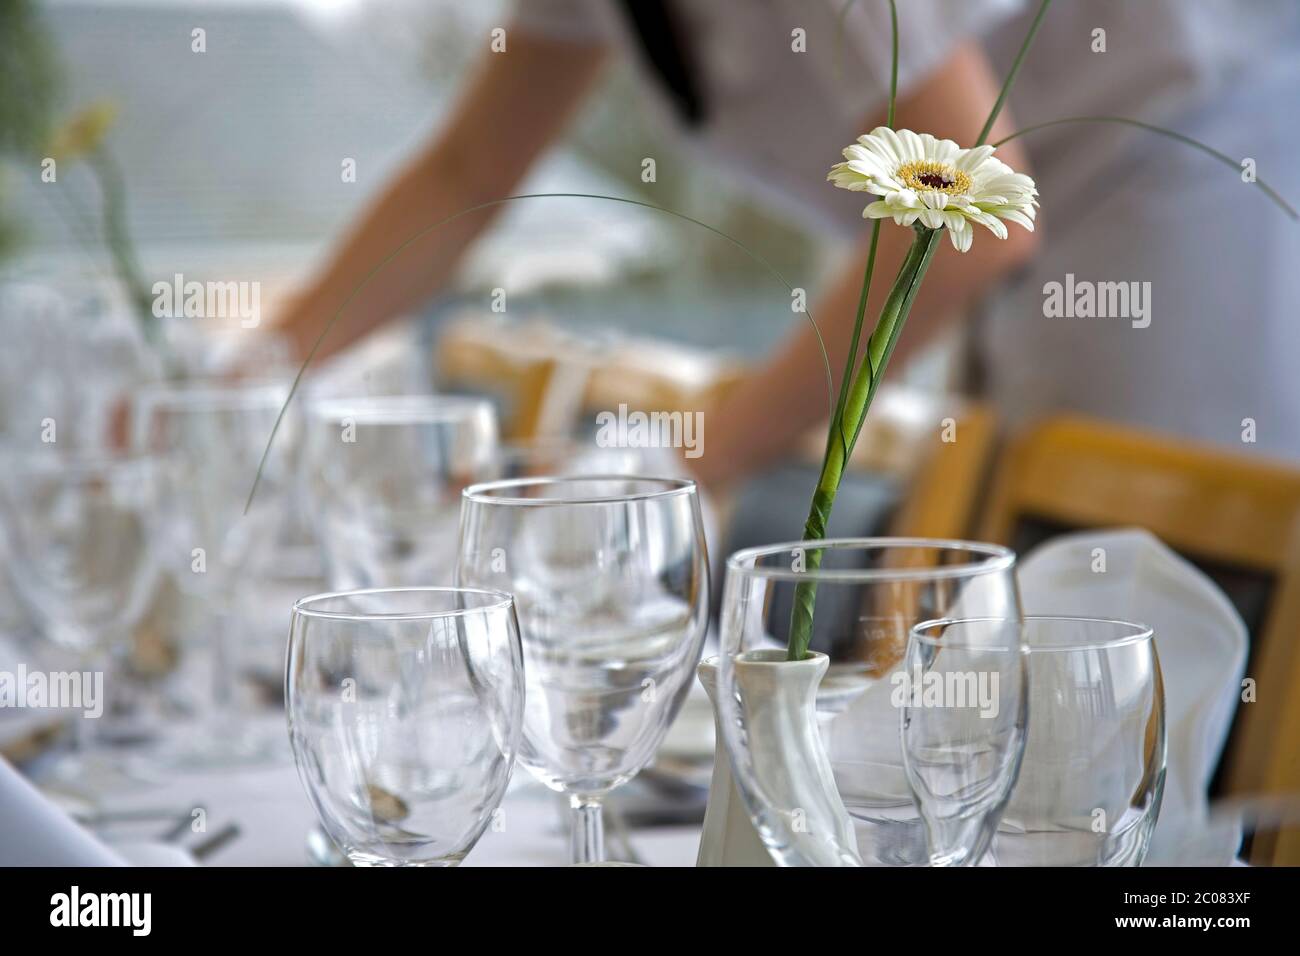 Dinner table being laid with wine glasses and flower display Stock Photo